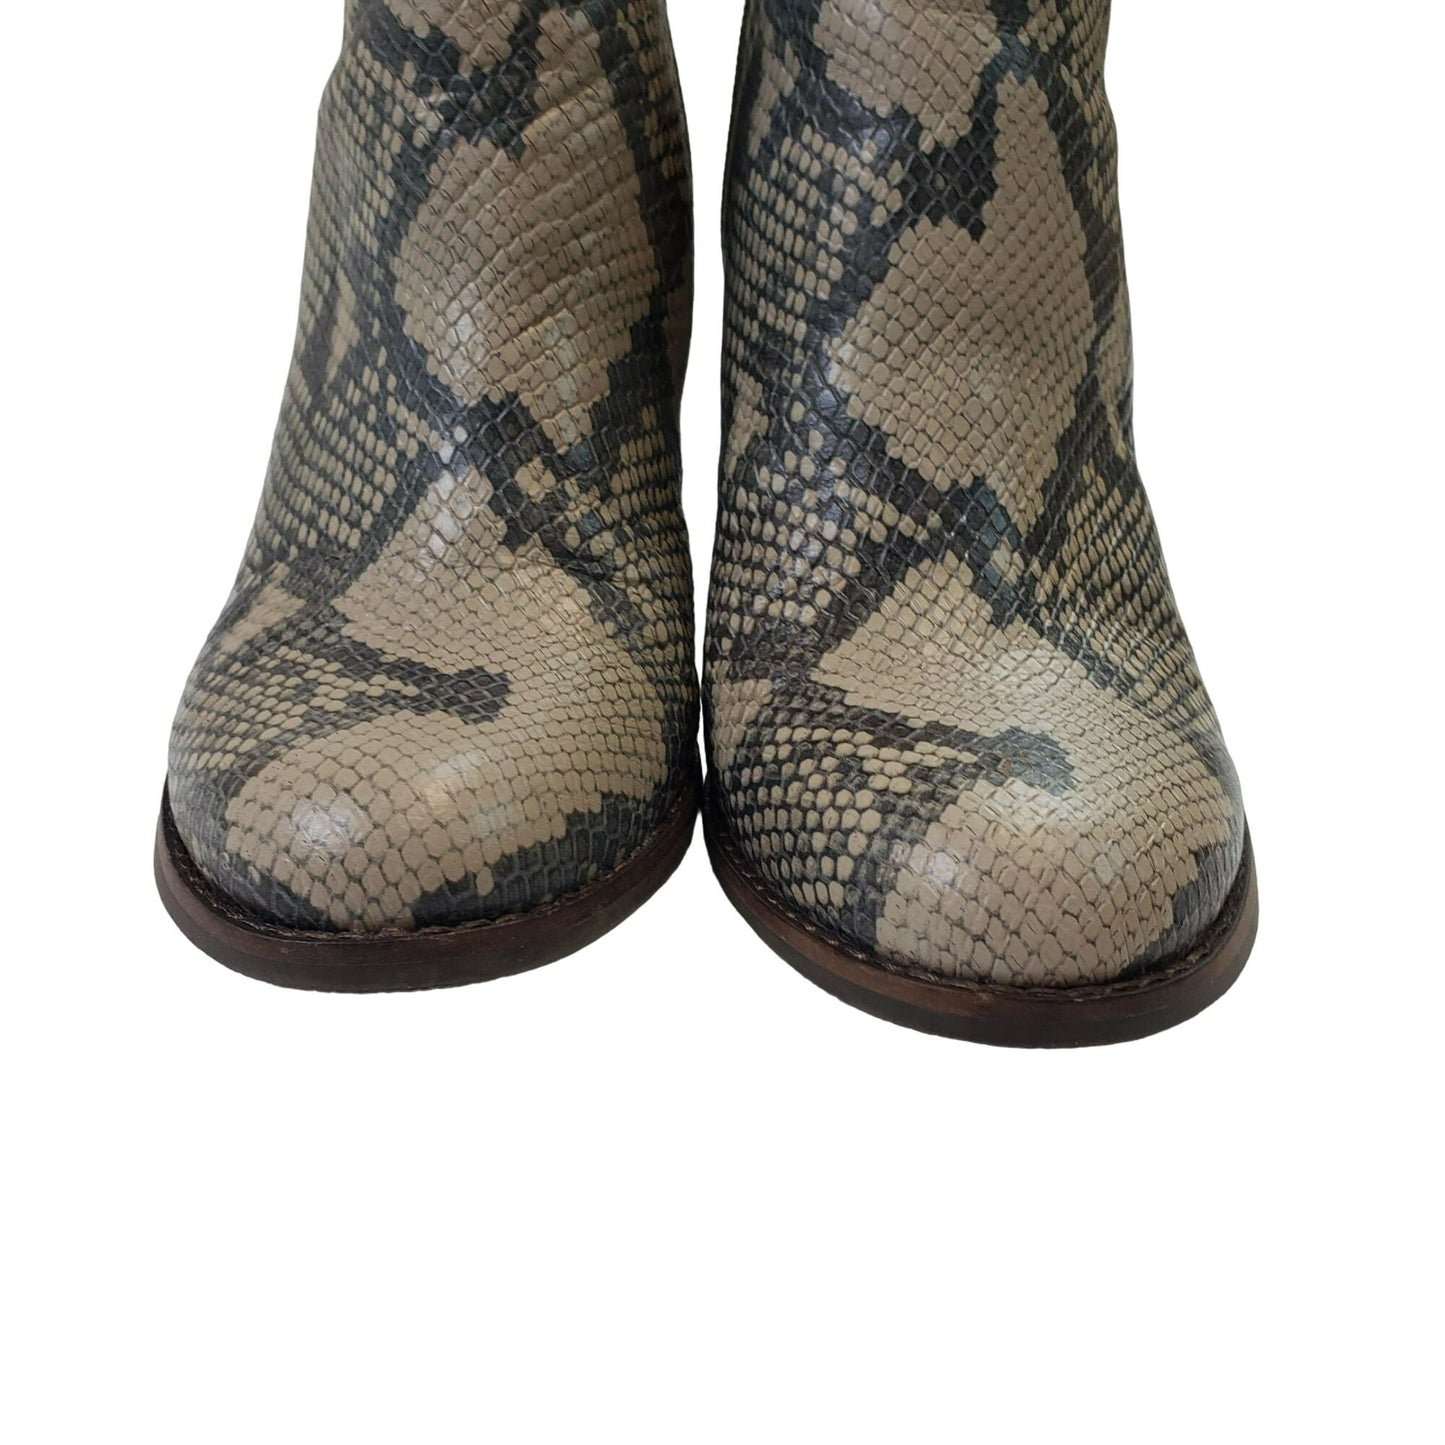 Lucky Brand Yimina Leather Snake Print Wedge Ankle Boots Size 8